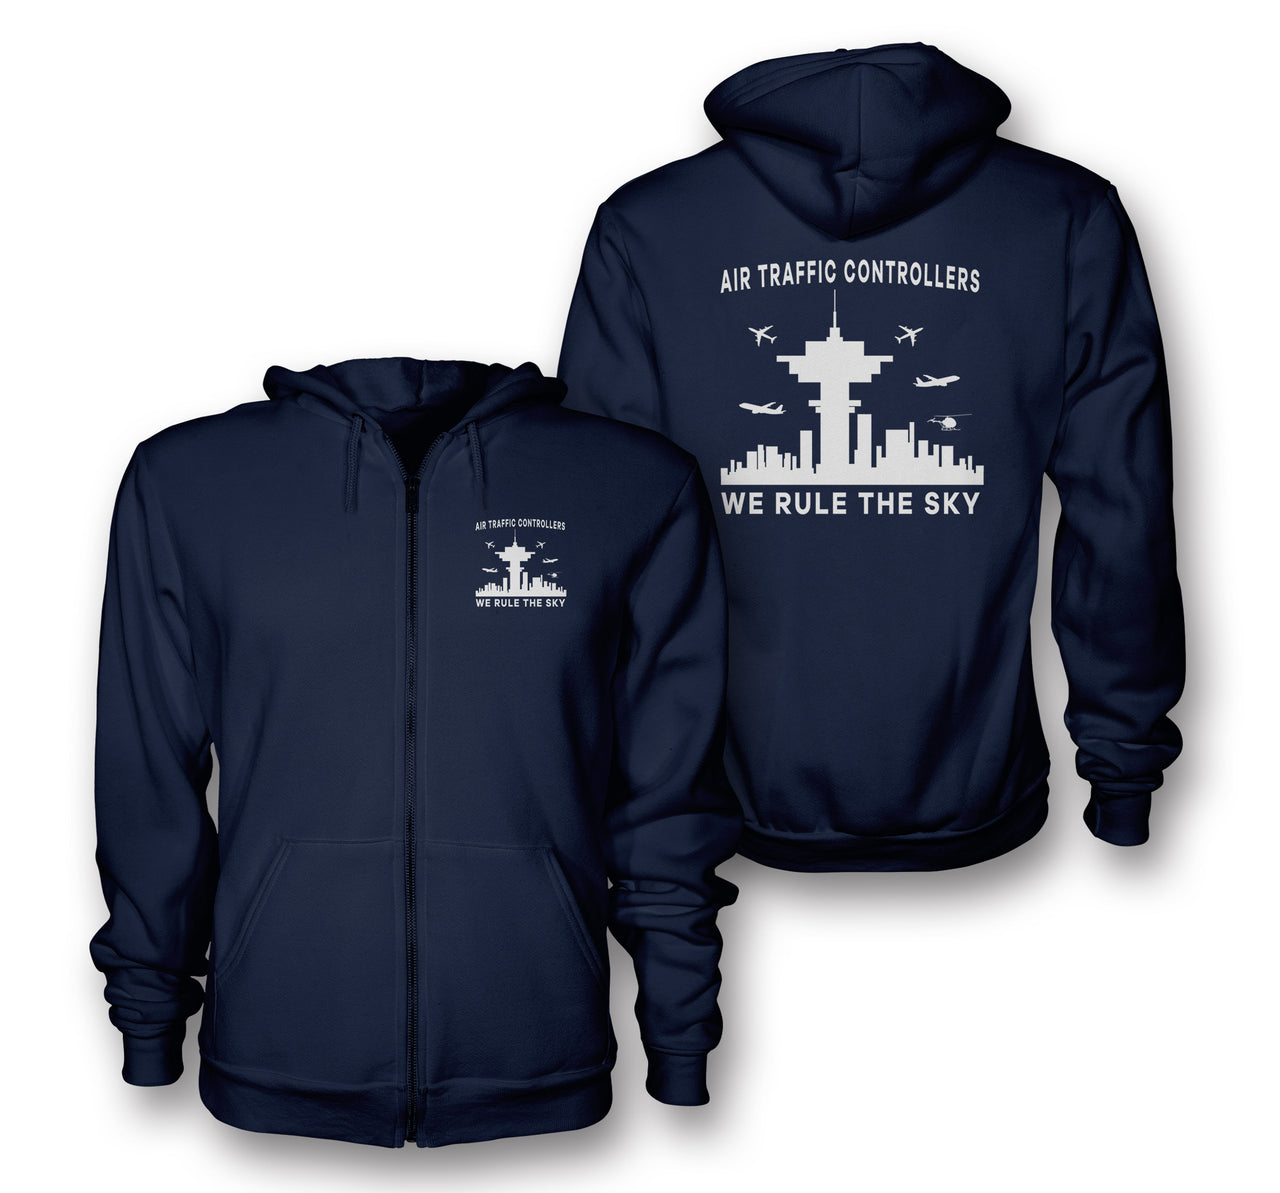 Air Traffic Controllers - We Rule The Sky Designed Zipped Hoodies